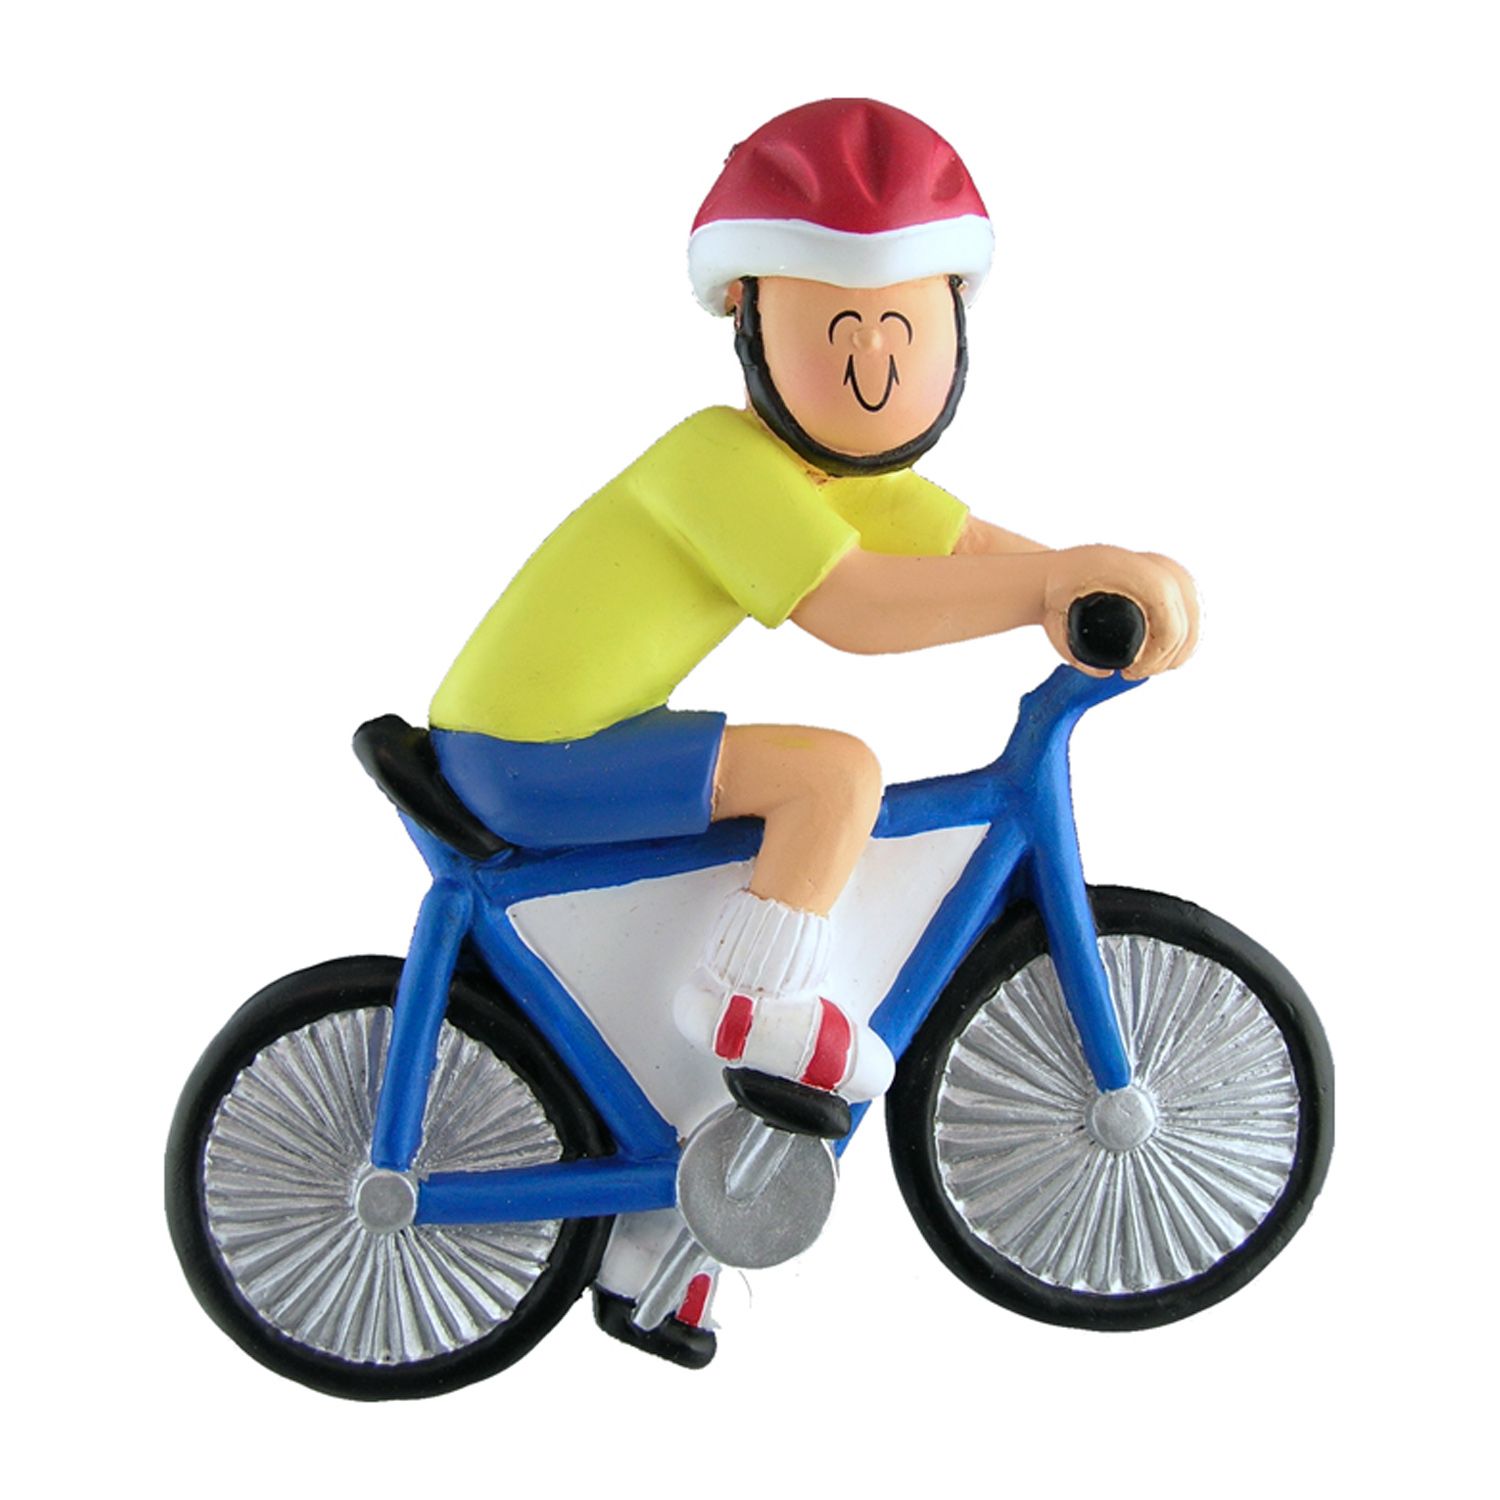 Personalized Bicycle Rider Christmas Tree Ornament 2019 - Athlete 